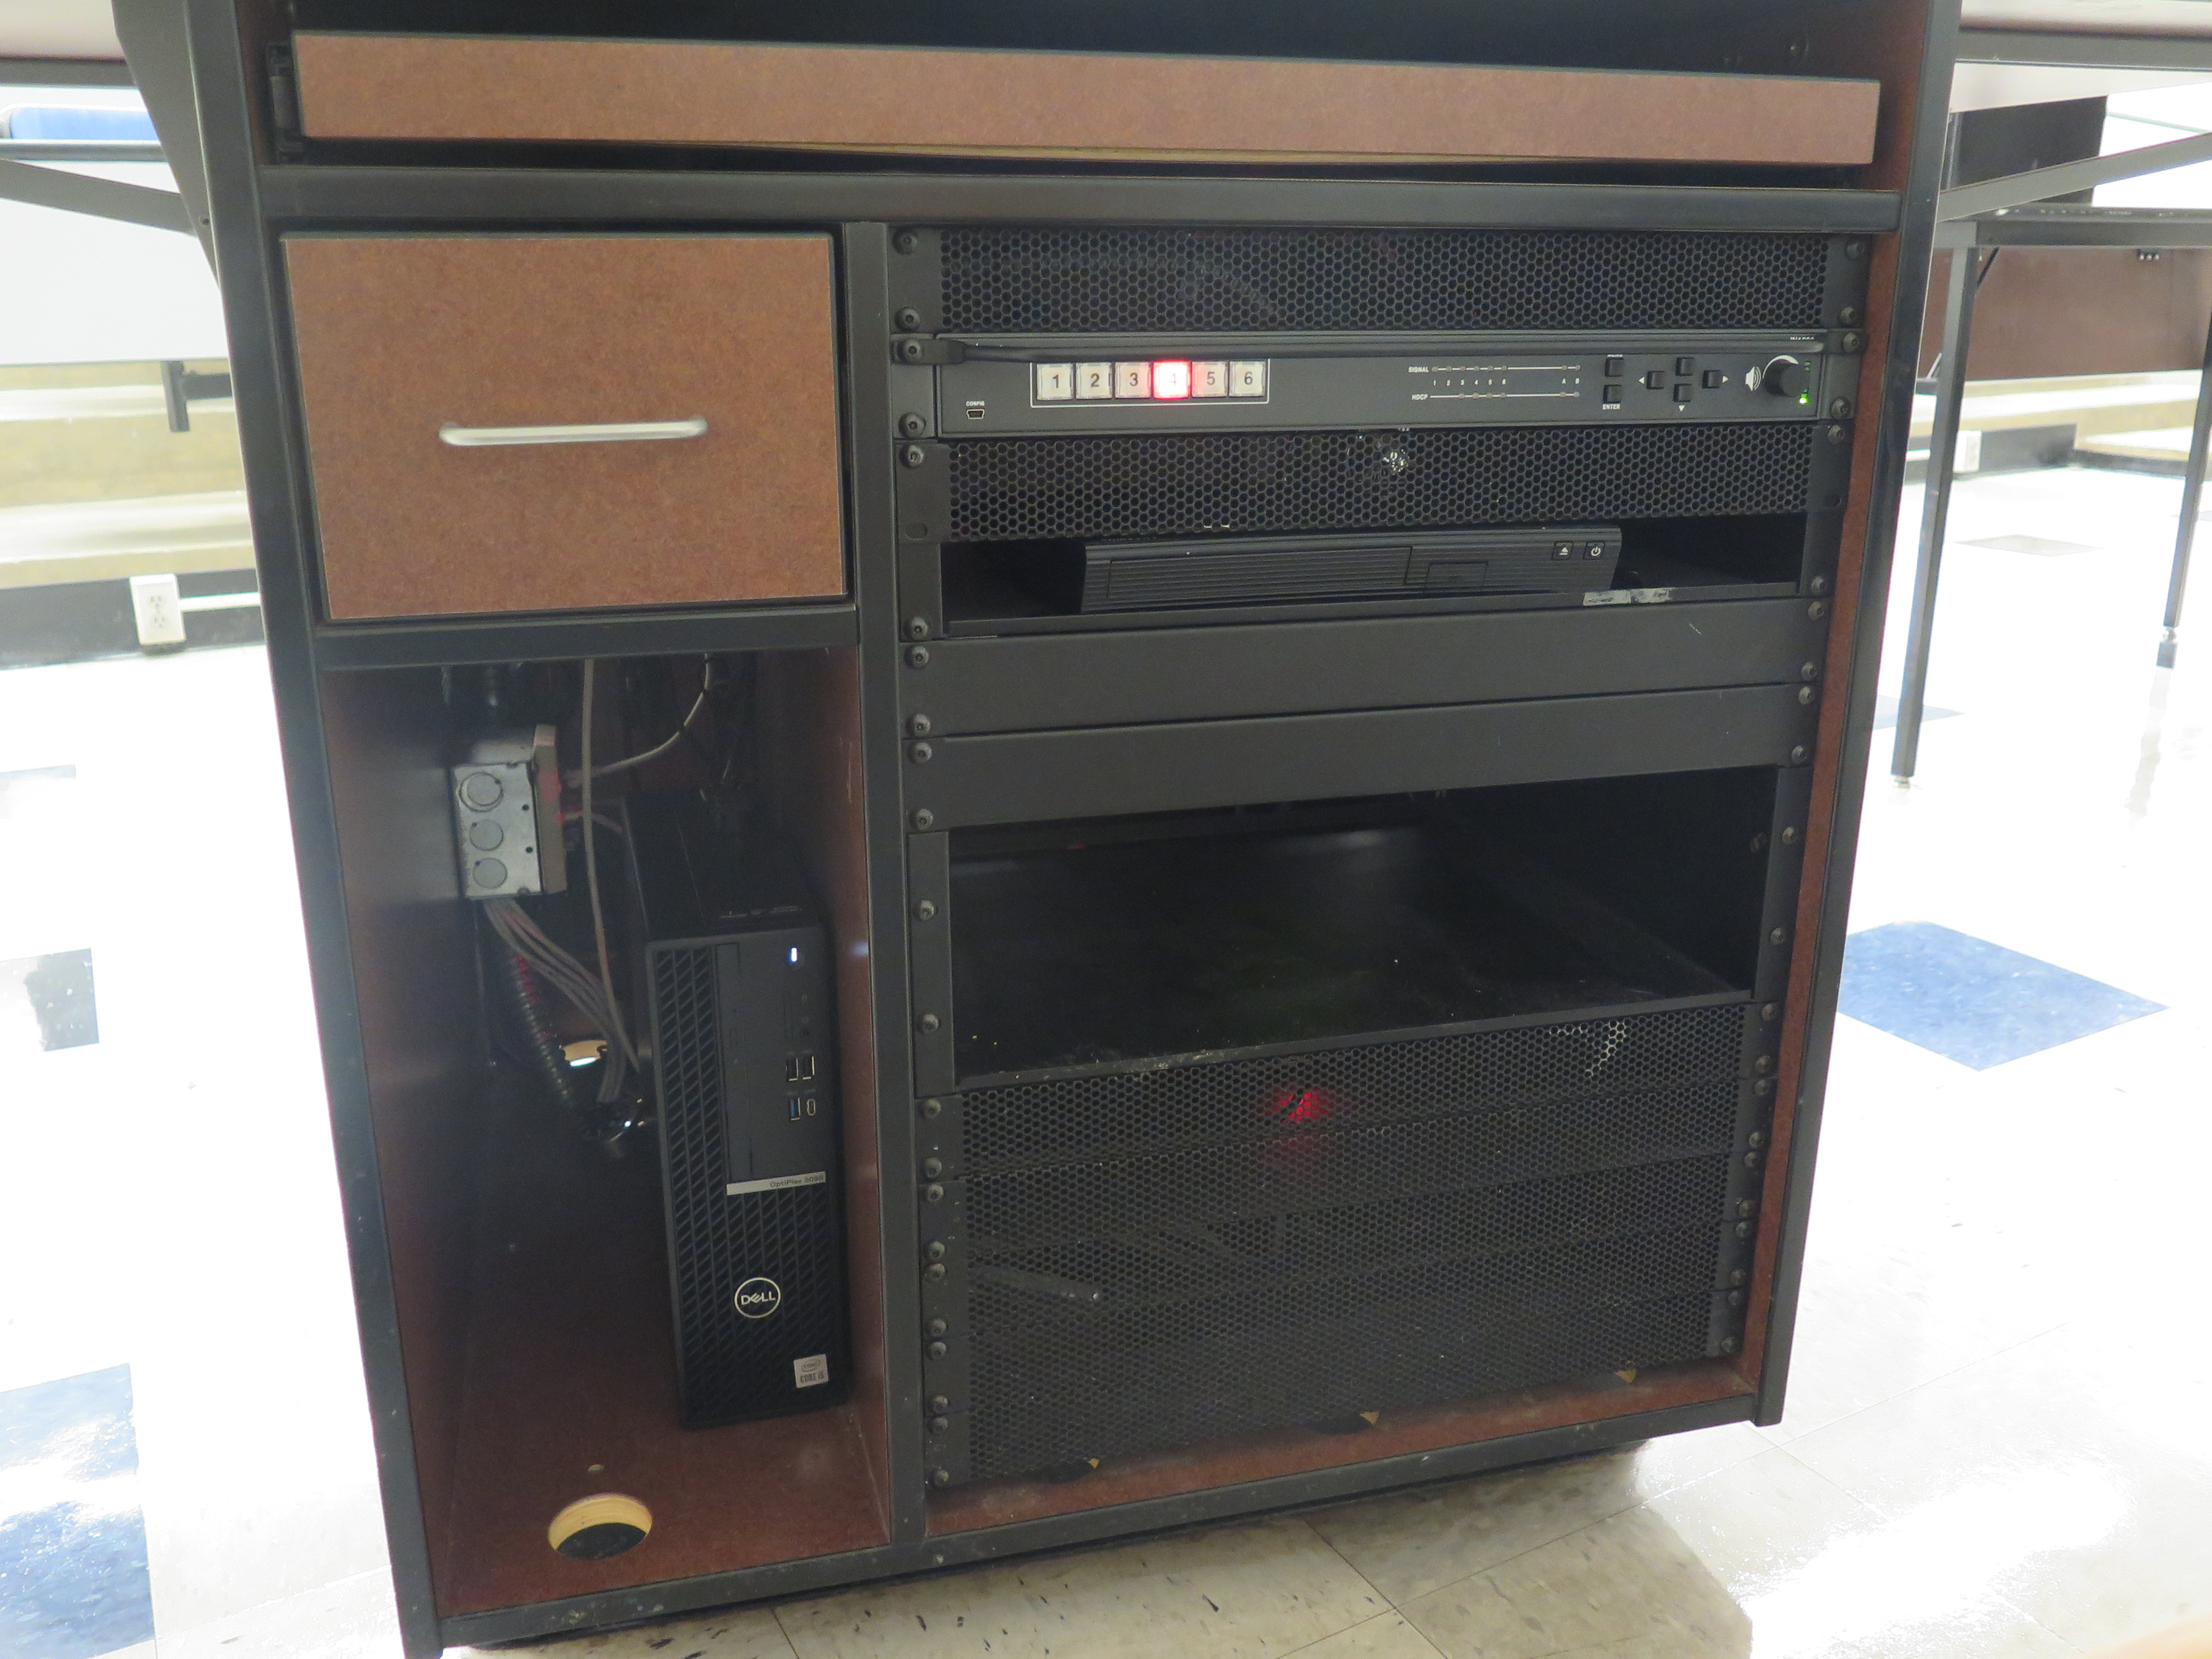 Front of Equipment rack showing AV Switcher. Below that is the DVD Player. To the left is the compartment with the Dell Computer CPU.